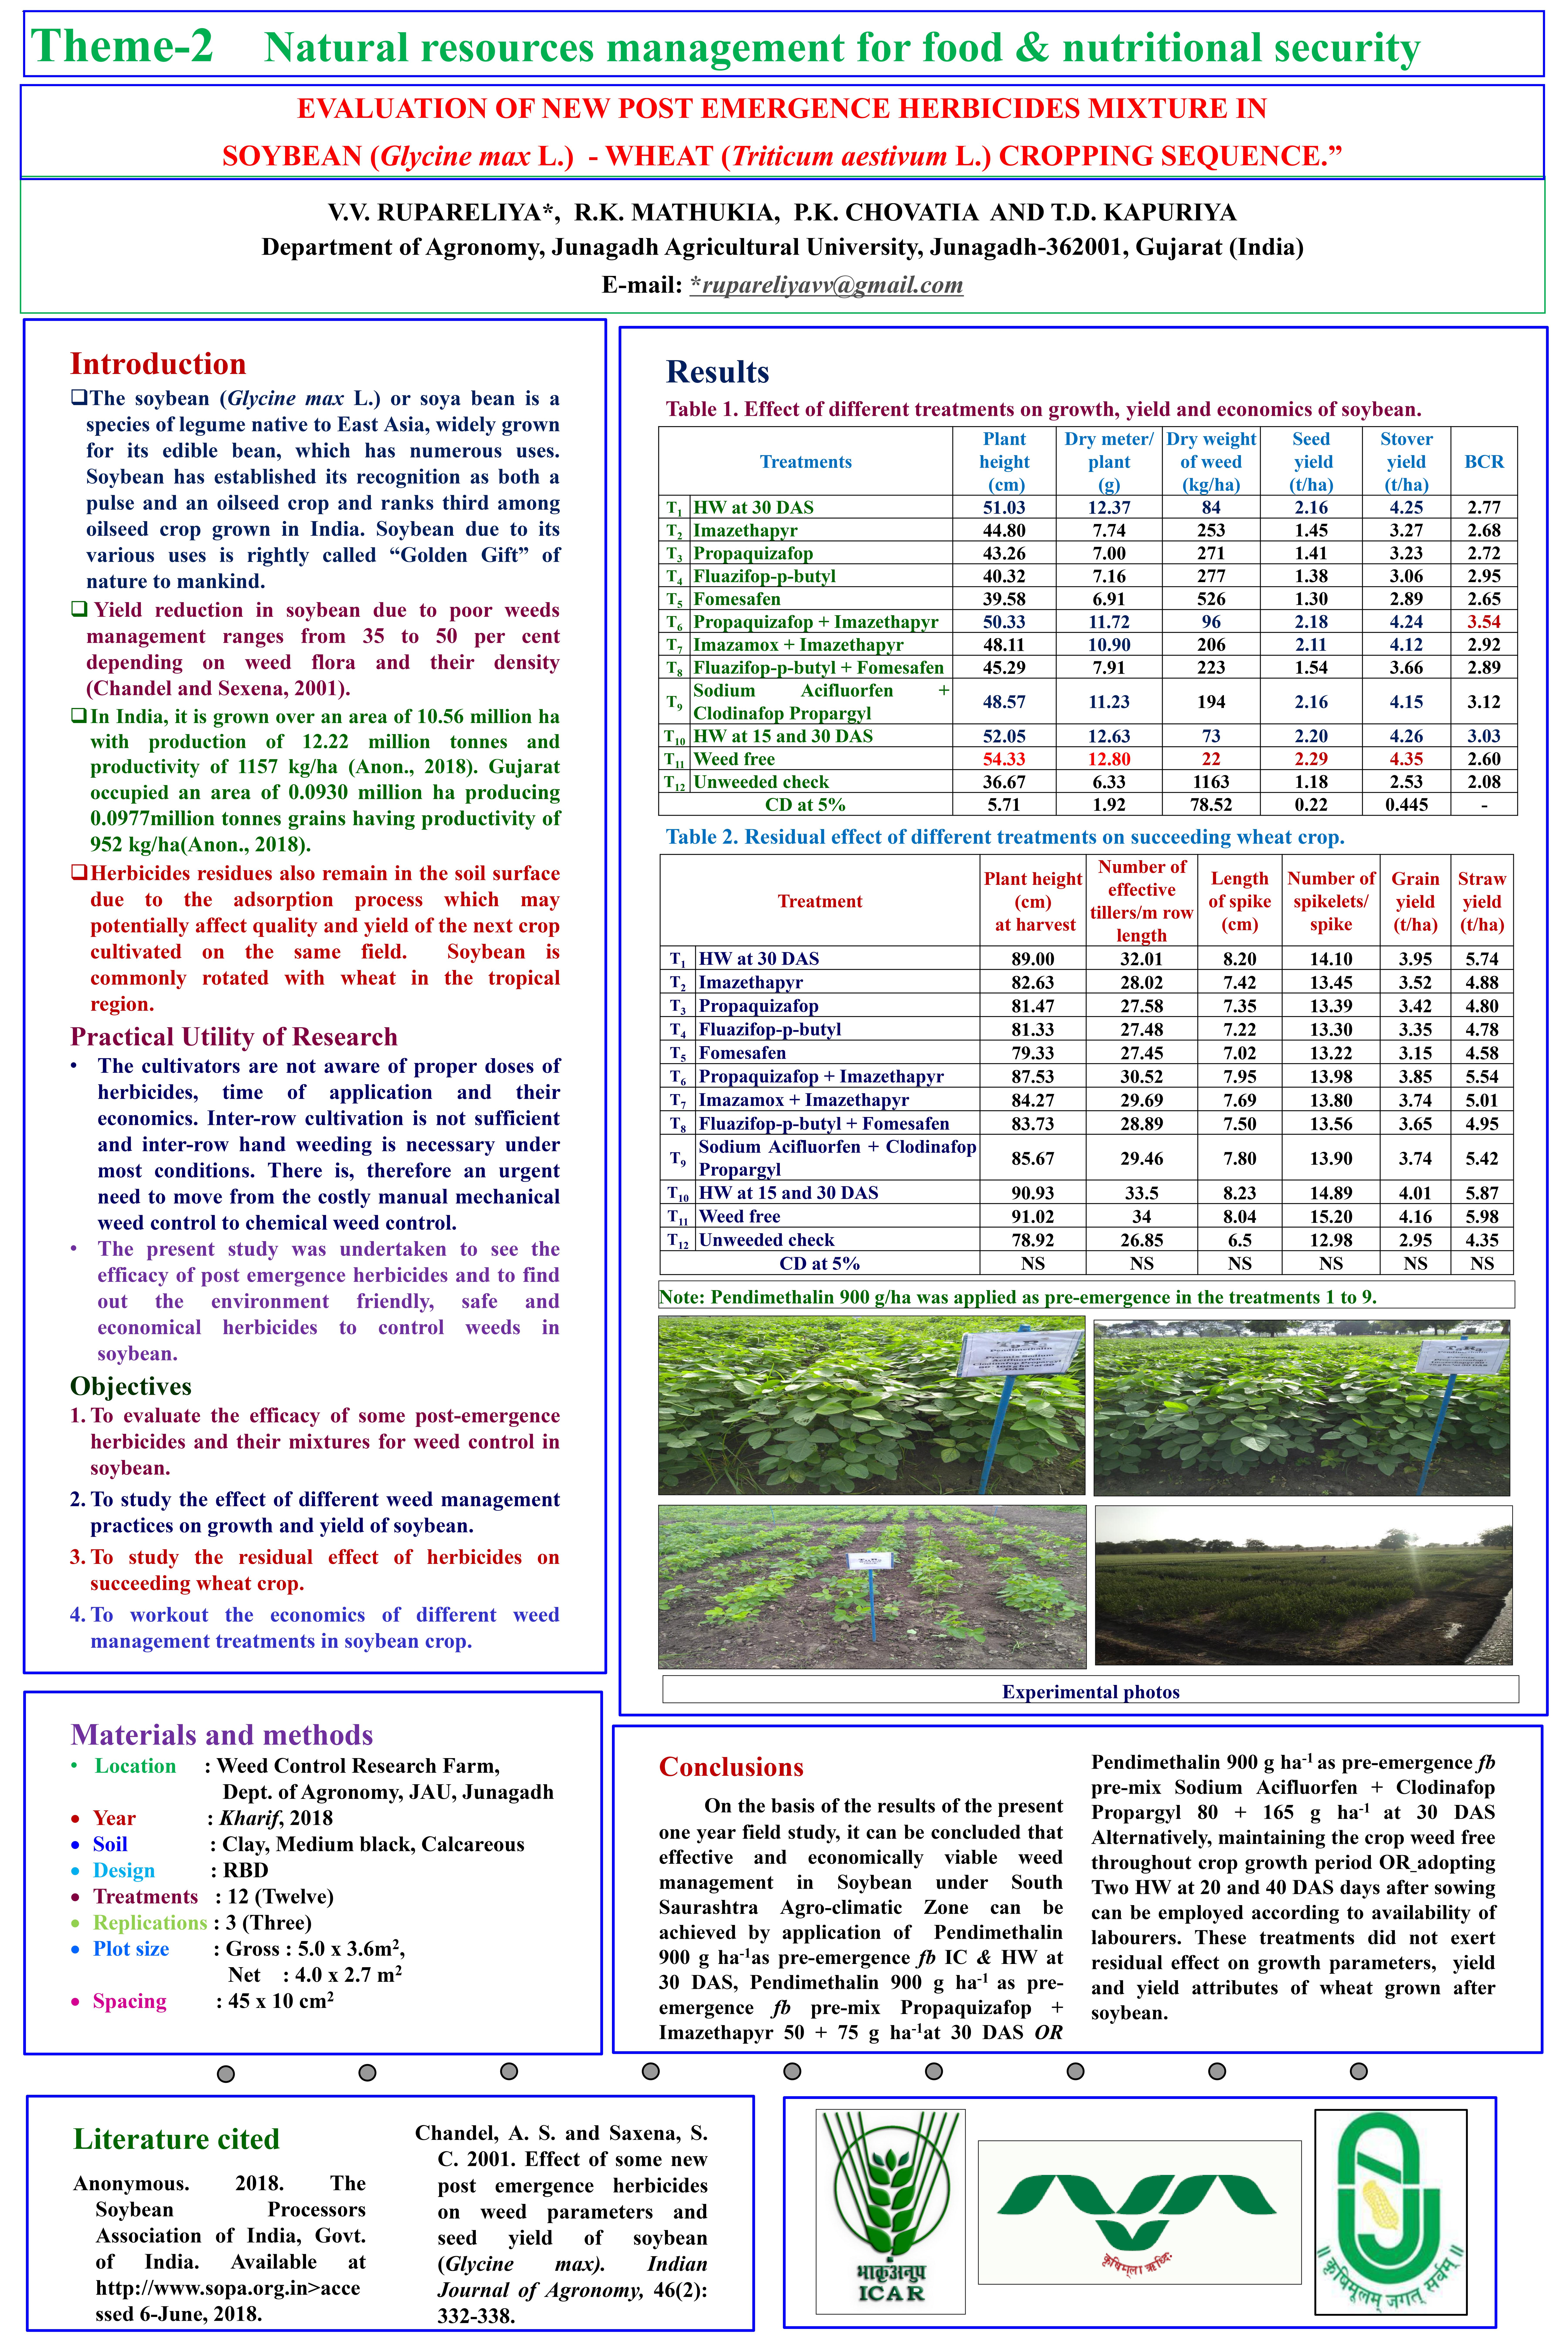 Evaluation of new post emergence herbicides mixture in  soybean - wheat cropping sequence